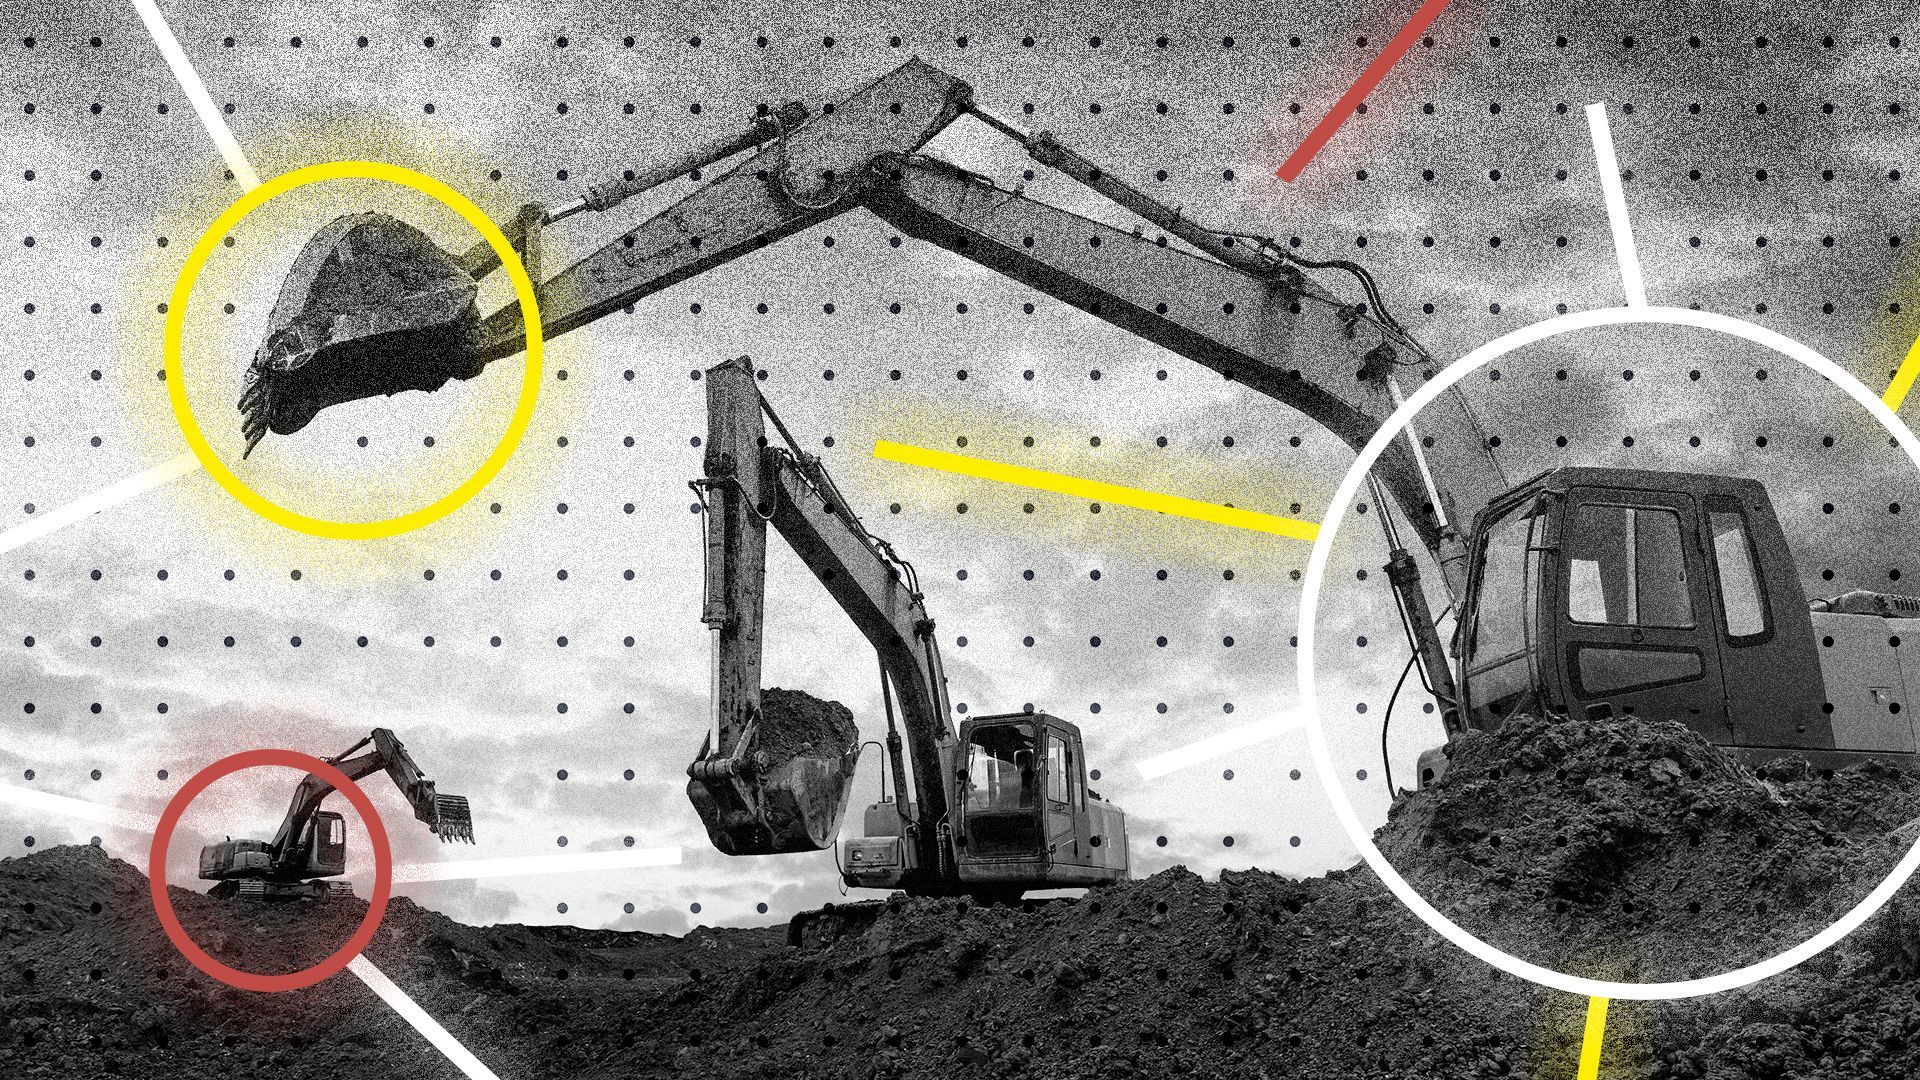 Illustration of construction excavators with glowing geometric shapes.